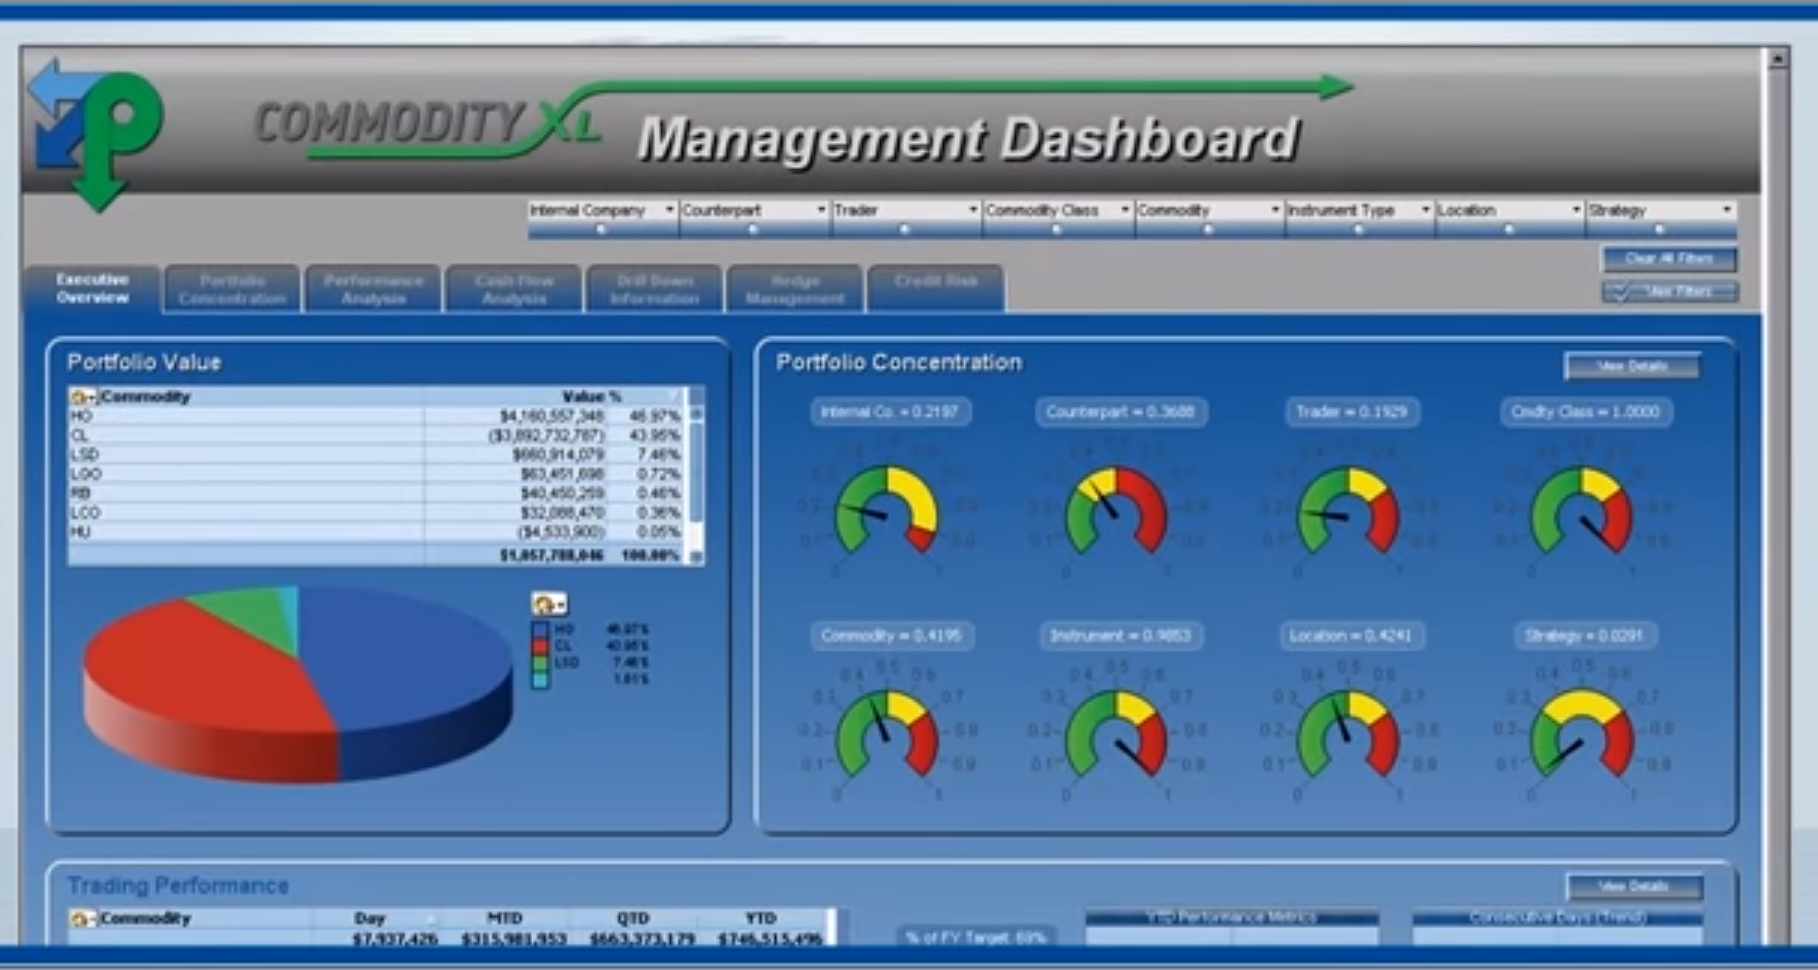 Commodity XL management dashboard